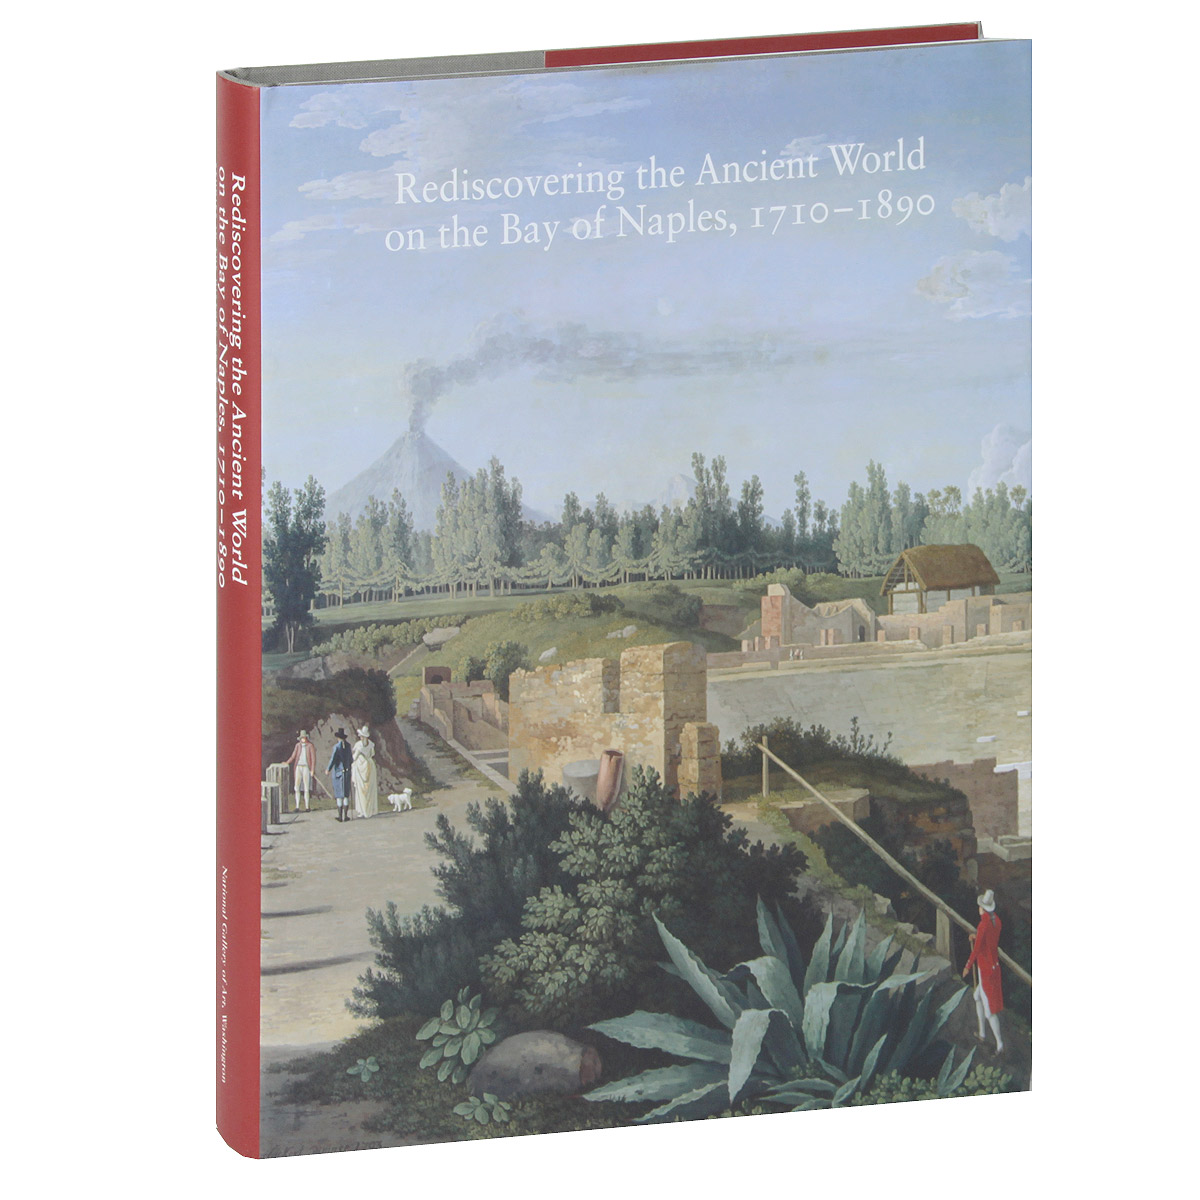 Carol C. Mattusch - «Rediscovering the Ancient World on the Bay of Naples, 1710-1890»